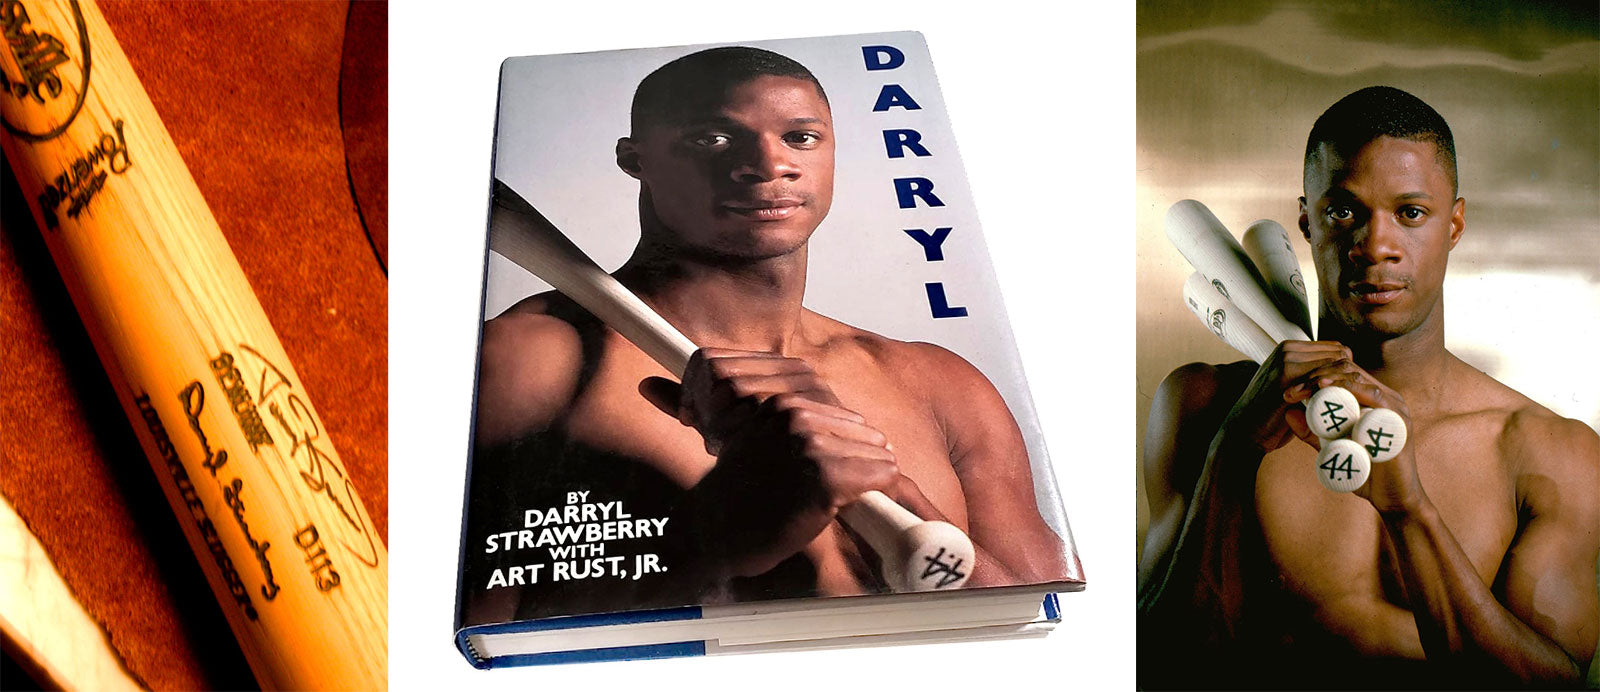 Images of Darryl Strawberry photographed by Gary Bernstein.